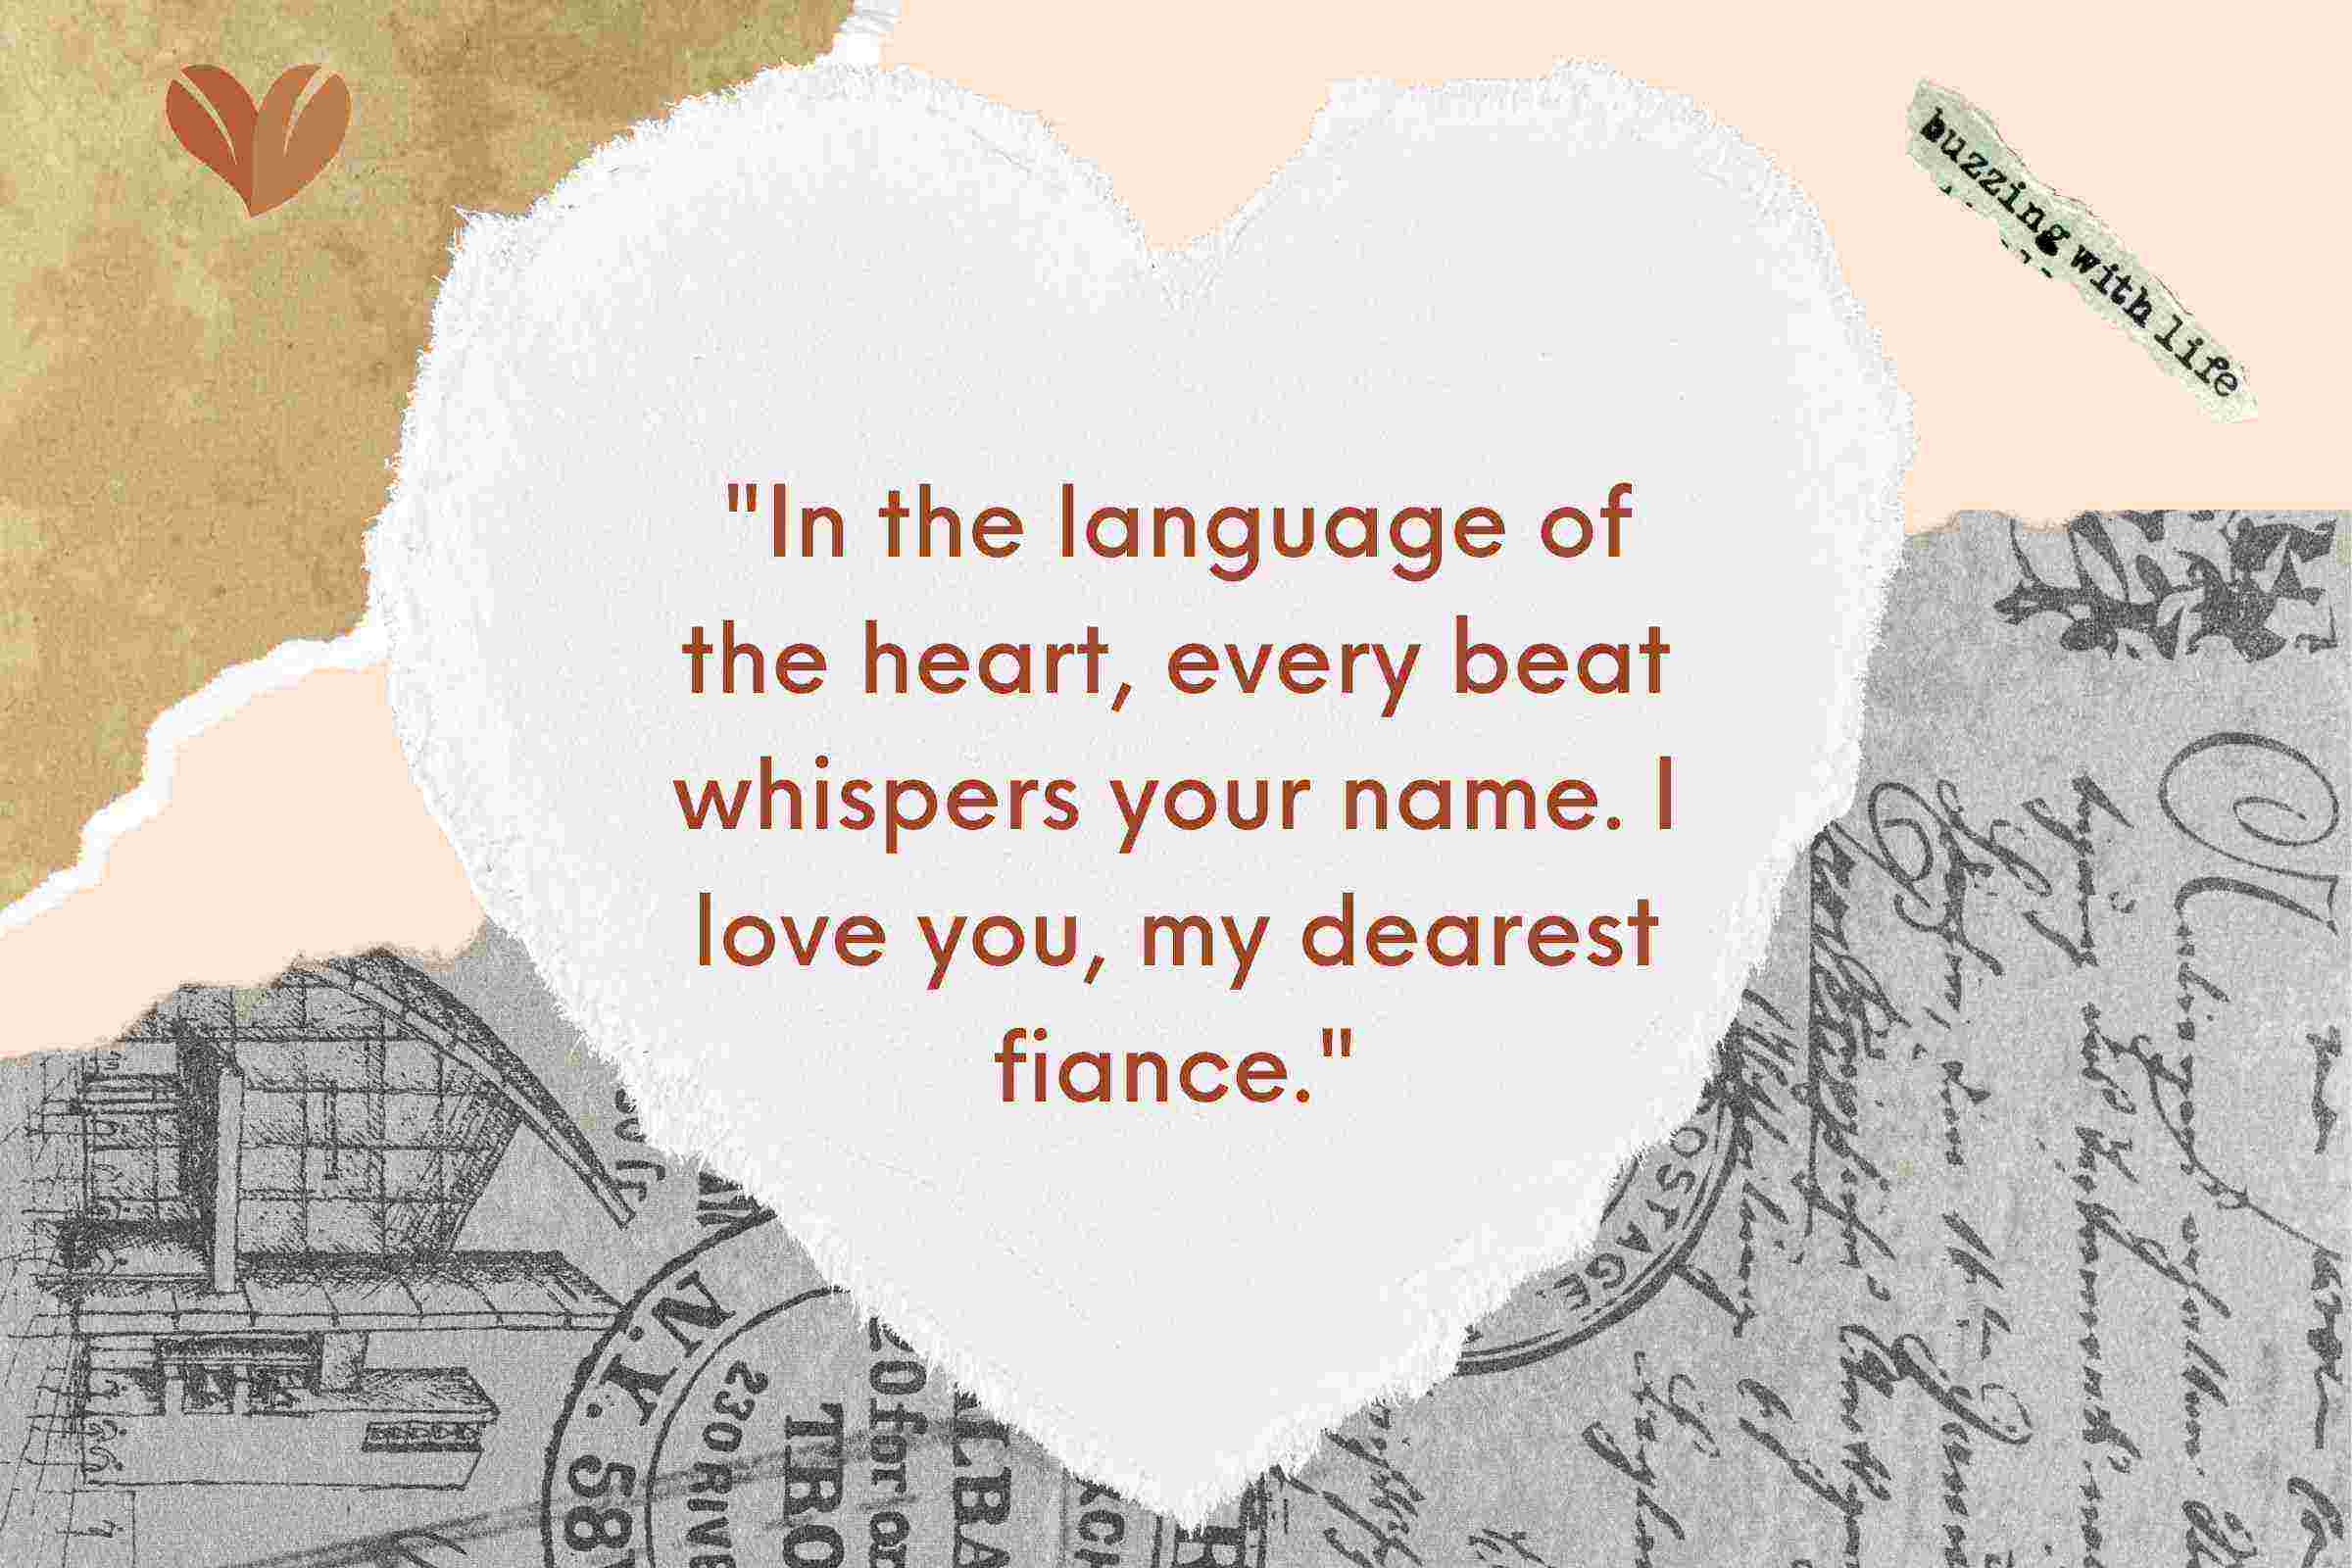 "In the language of the heart, every beat whispers your name. I love you, my dearest fiance."